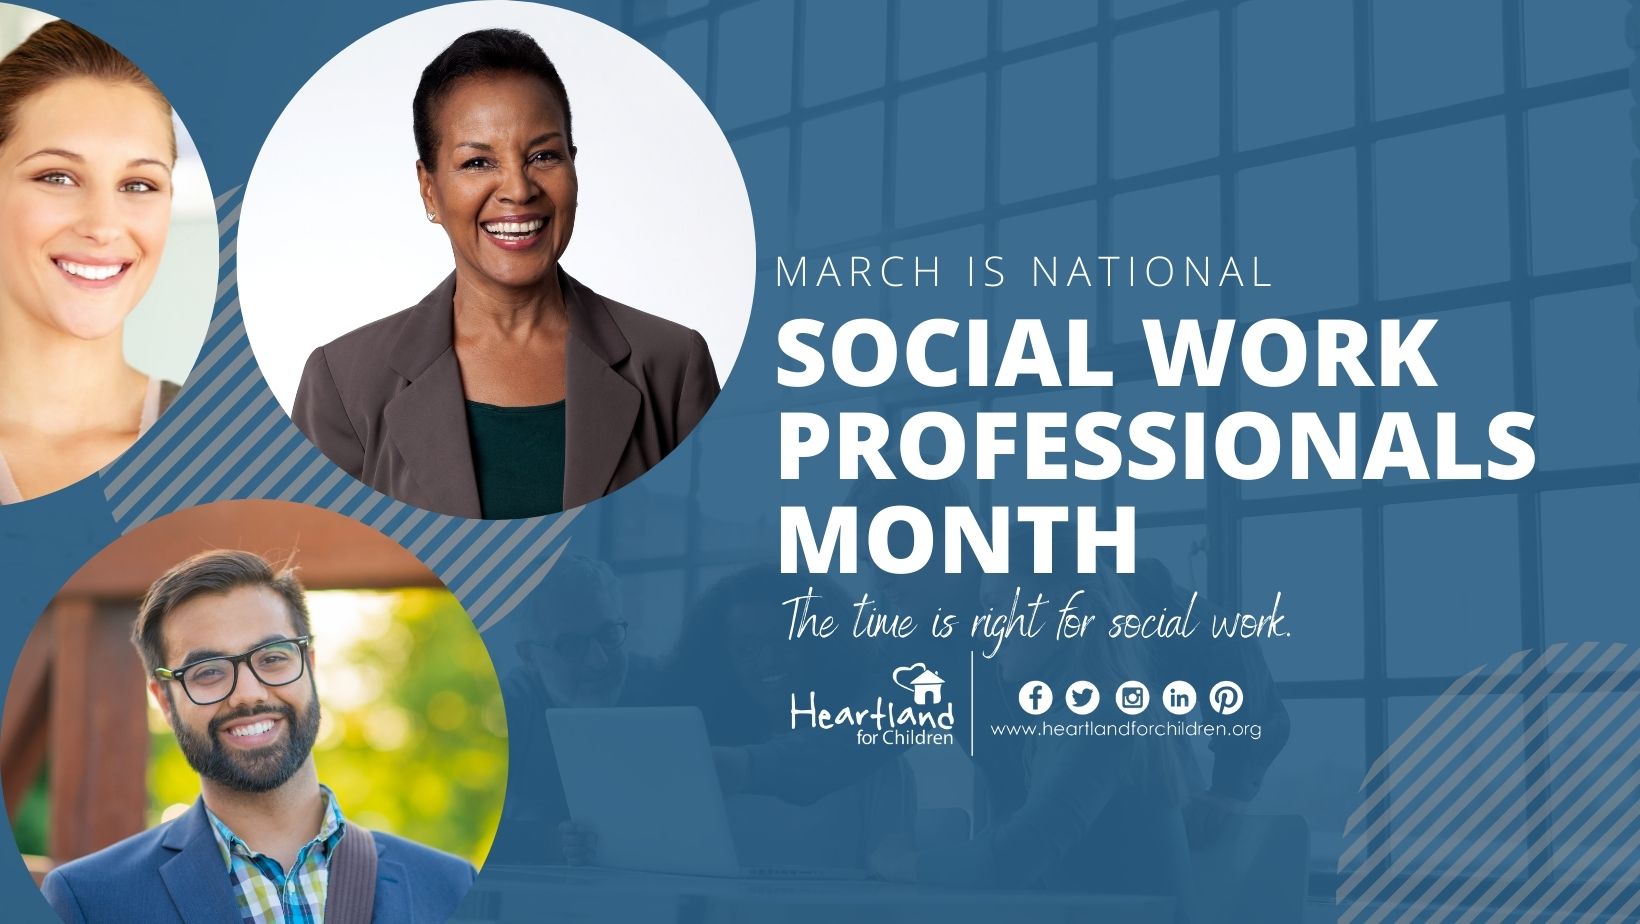 National Social Work Professionals Month